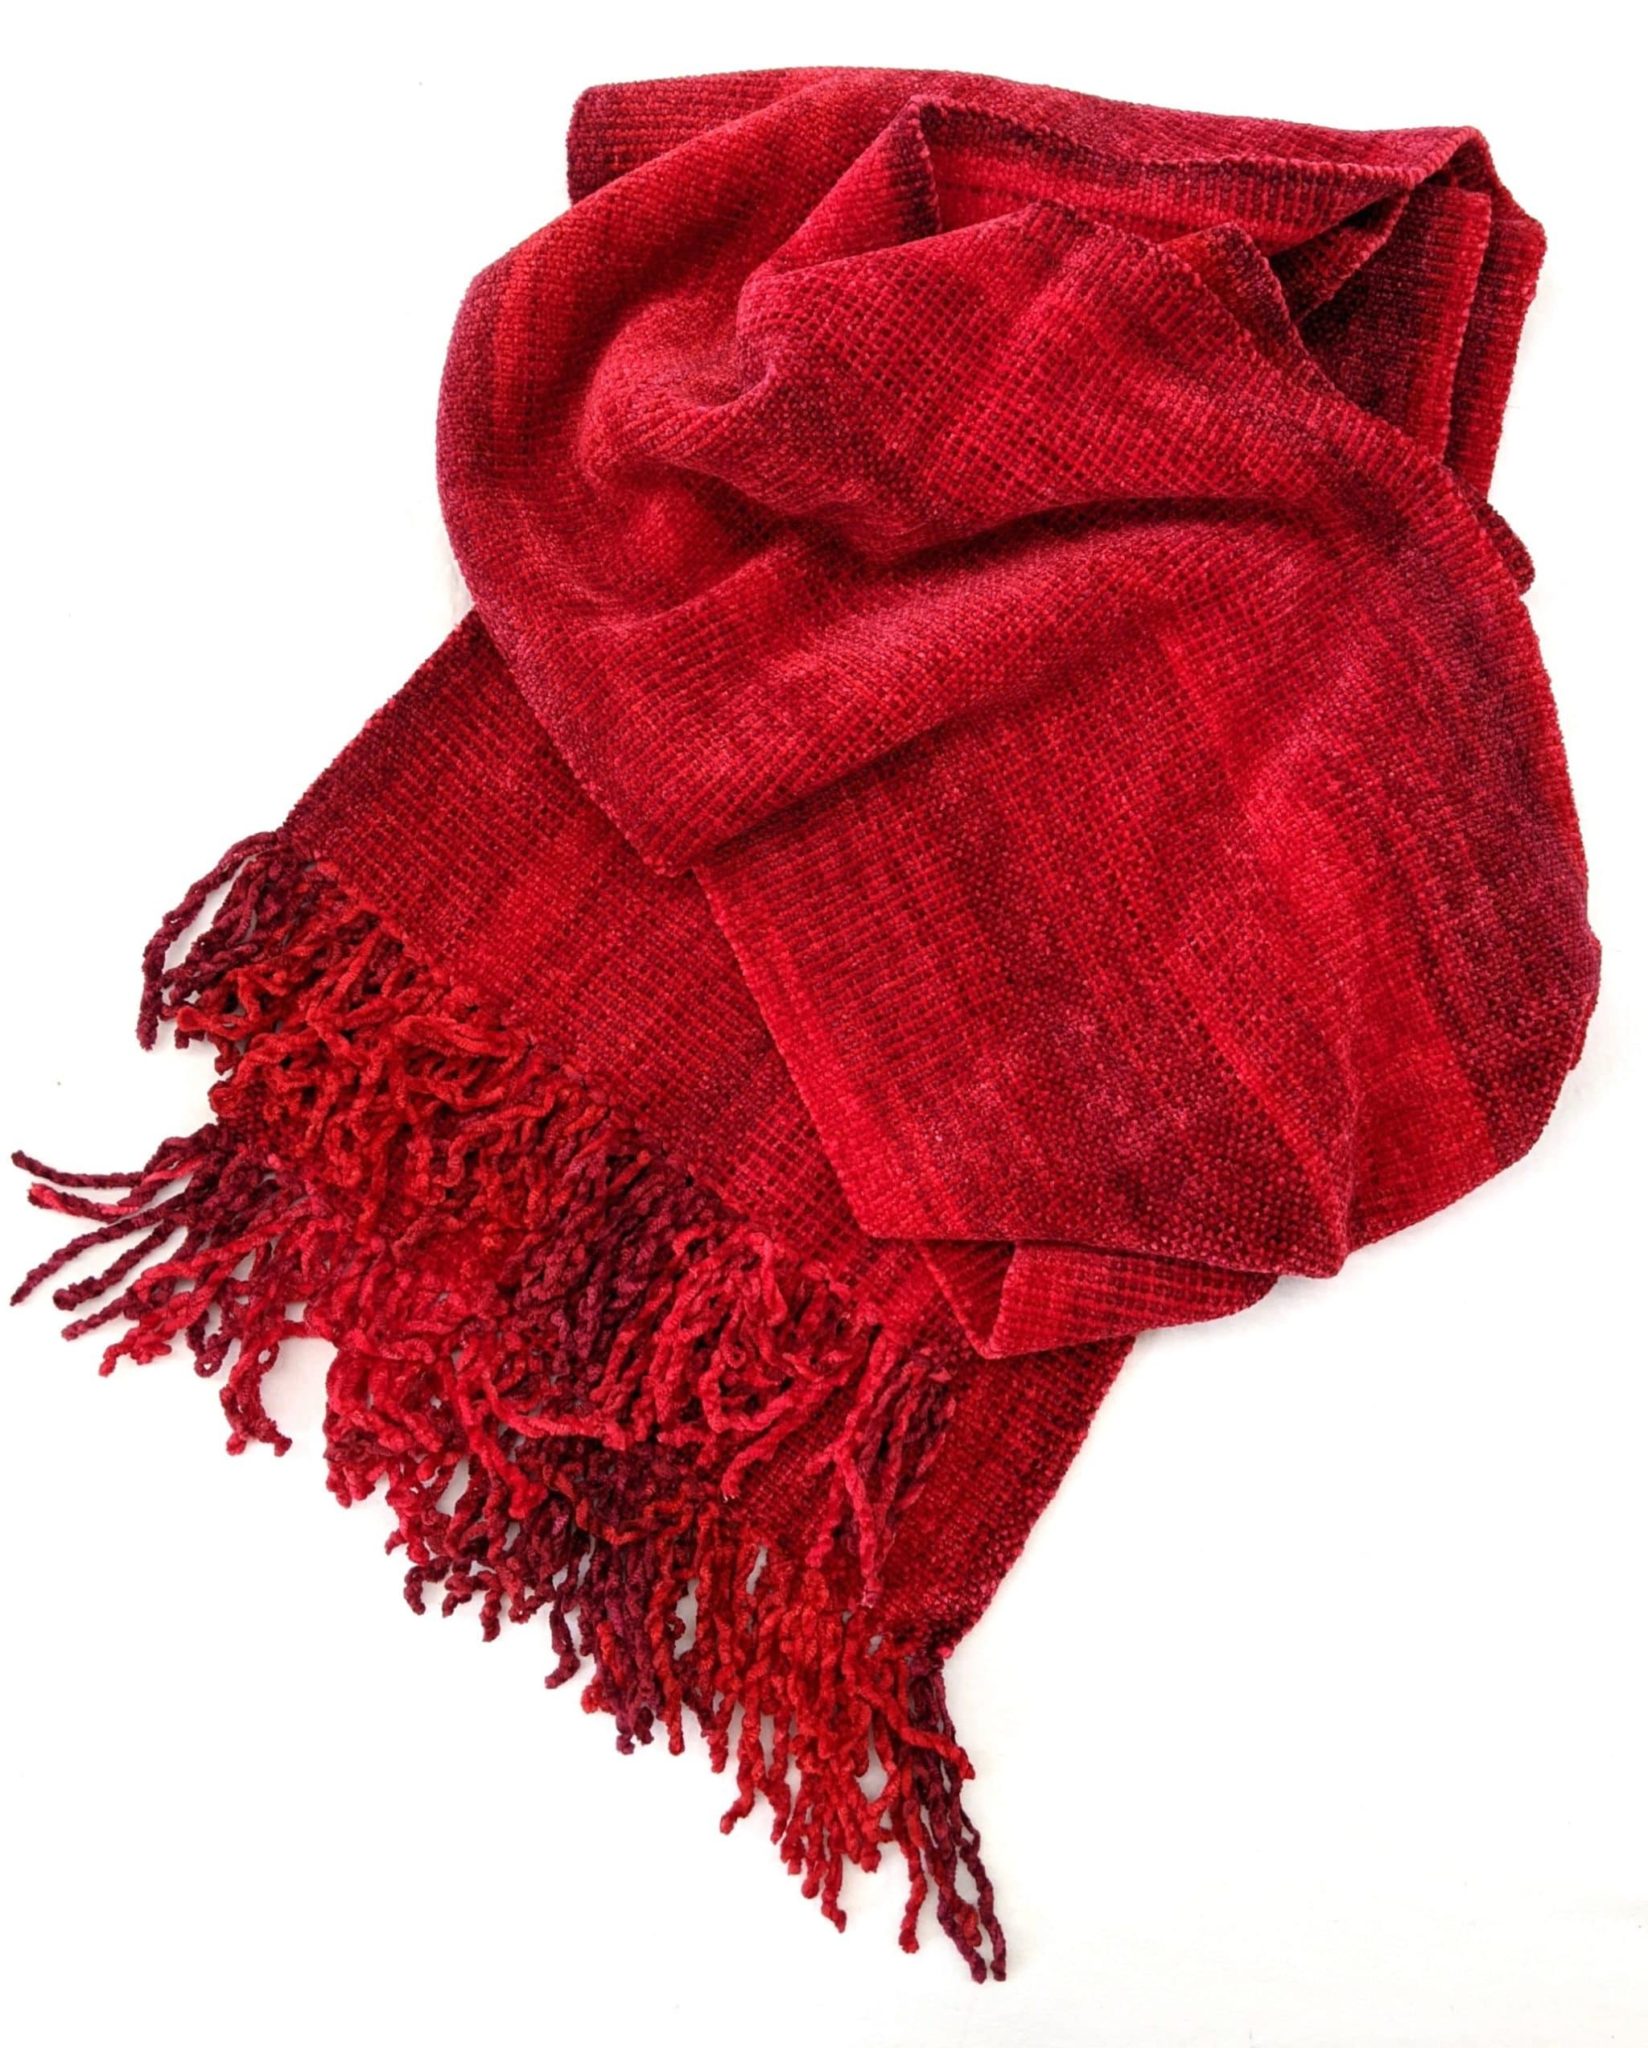 Reds (Bright!) - Bamboo Chenille Handwoven Scarf 8 x 68